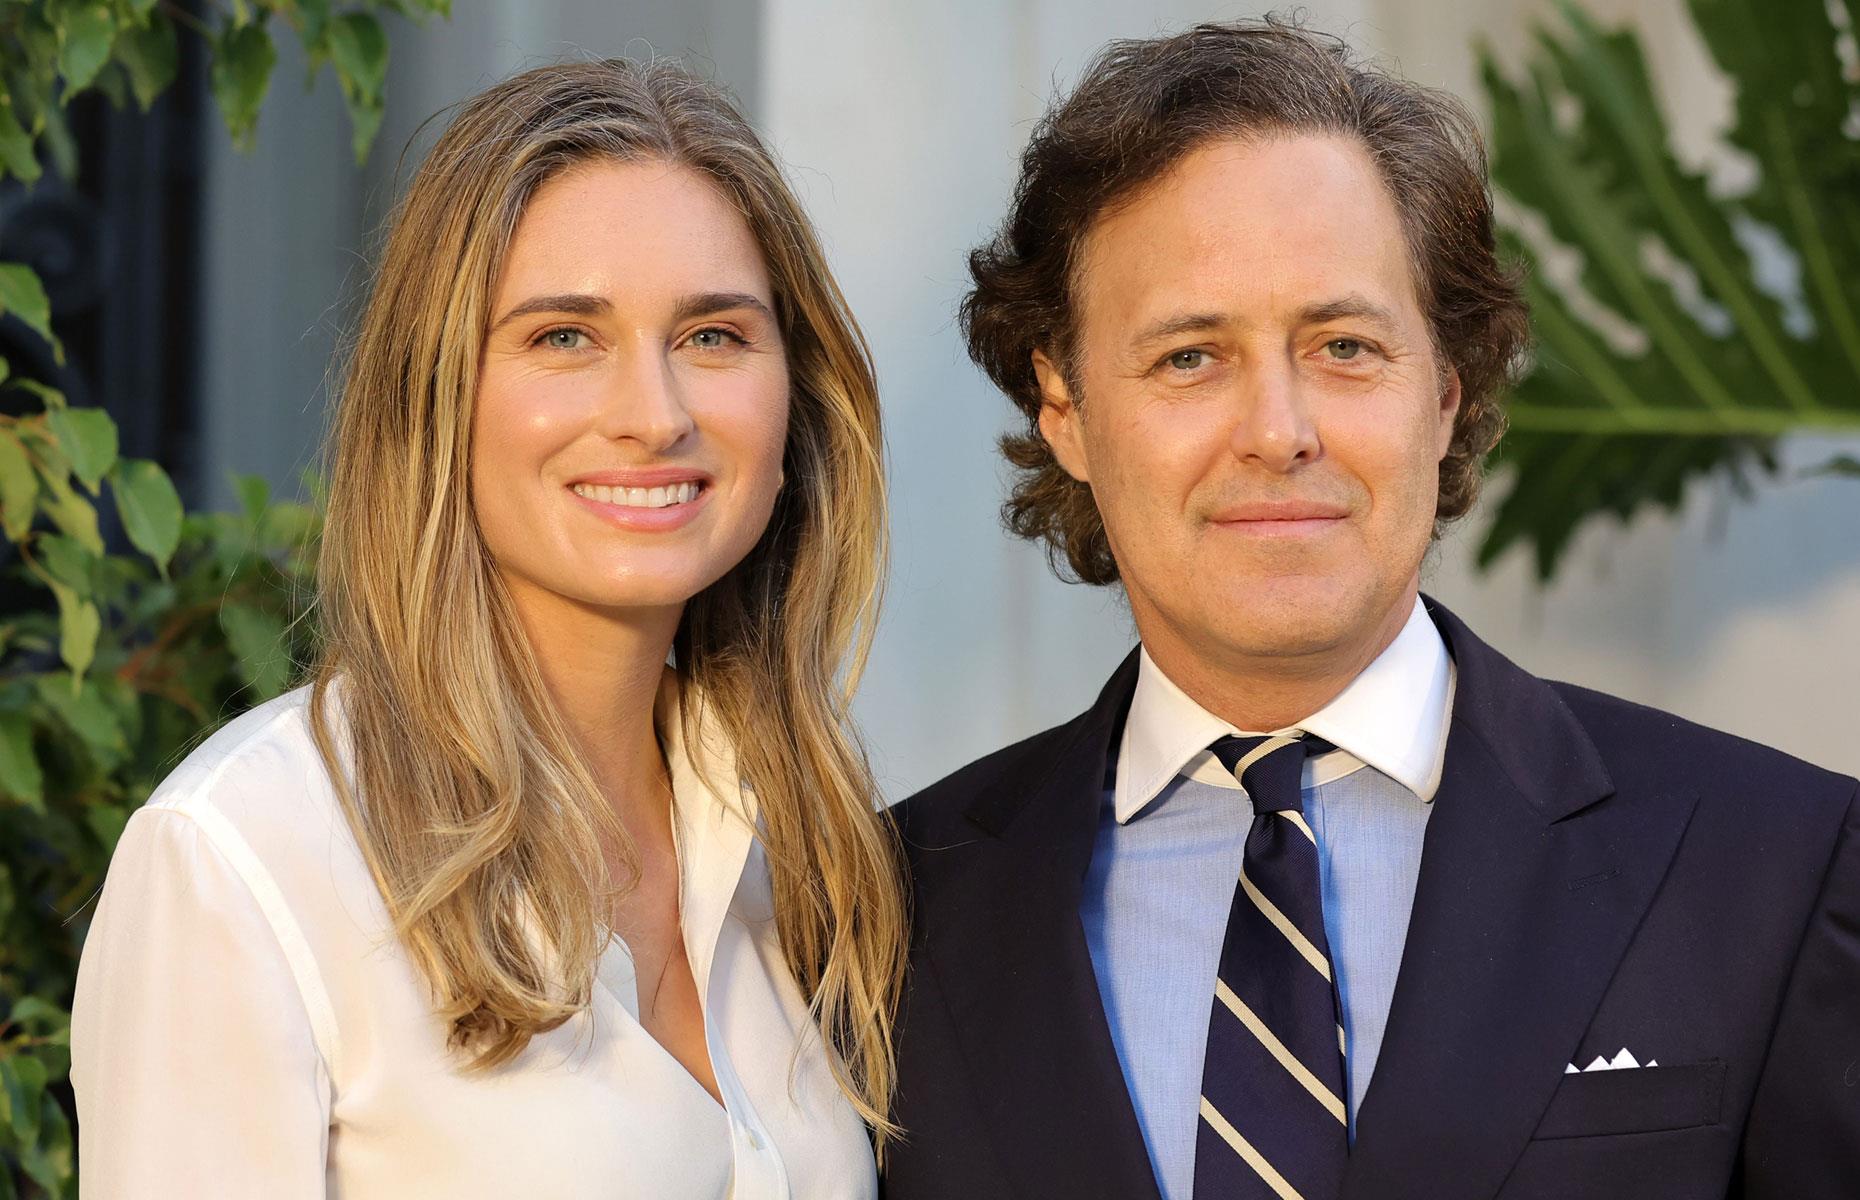 <p>While a number of mega-rich families have married into the Bush clan over the years, none are quite so wealthy as the Laurens.</p>  <p>The second son of fashion mogul Ralph Lauren, David Lauren tied the knot with Lauren Bush in 2011. </p>  <p>David joined the Ralph Lauren board in 2013 and currently serves as the fashion label's chief branding and innovation officer.</p>